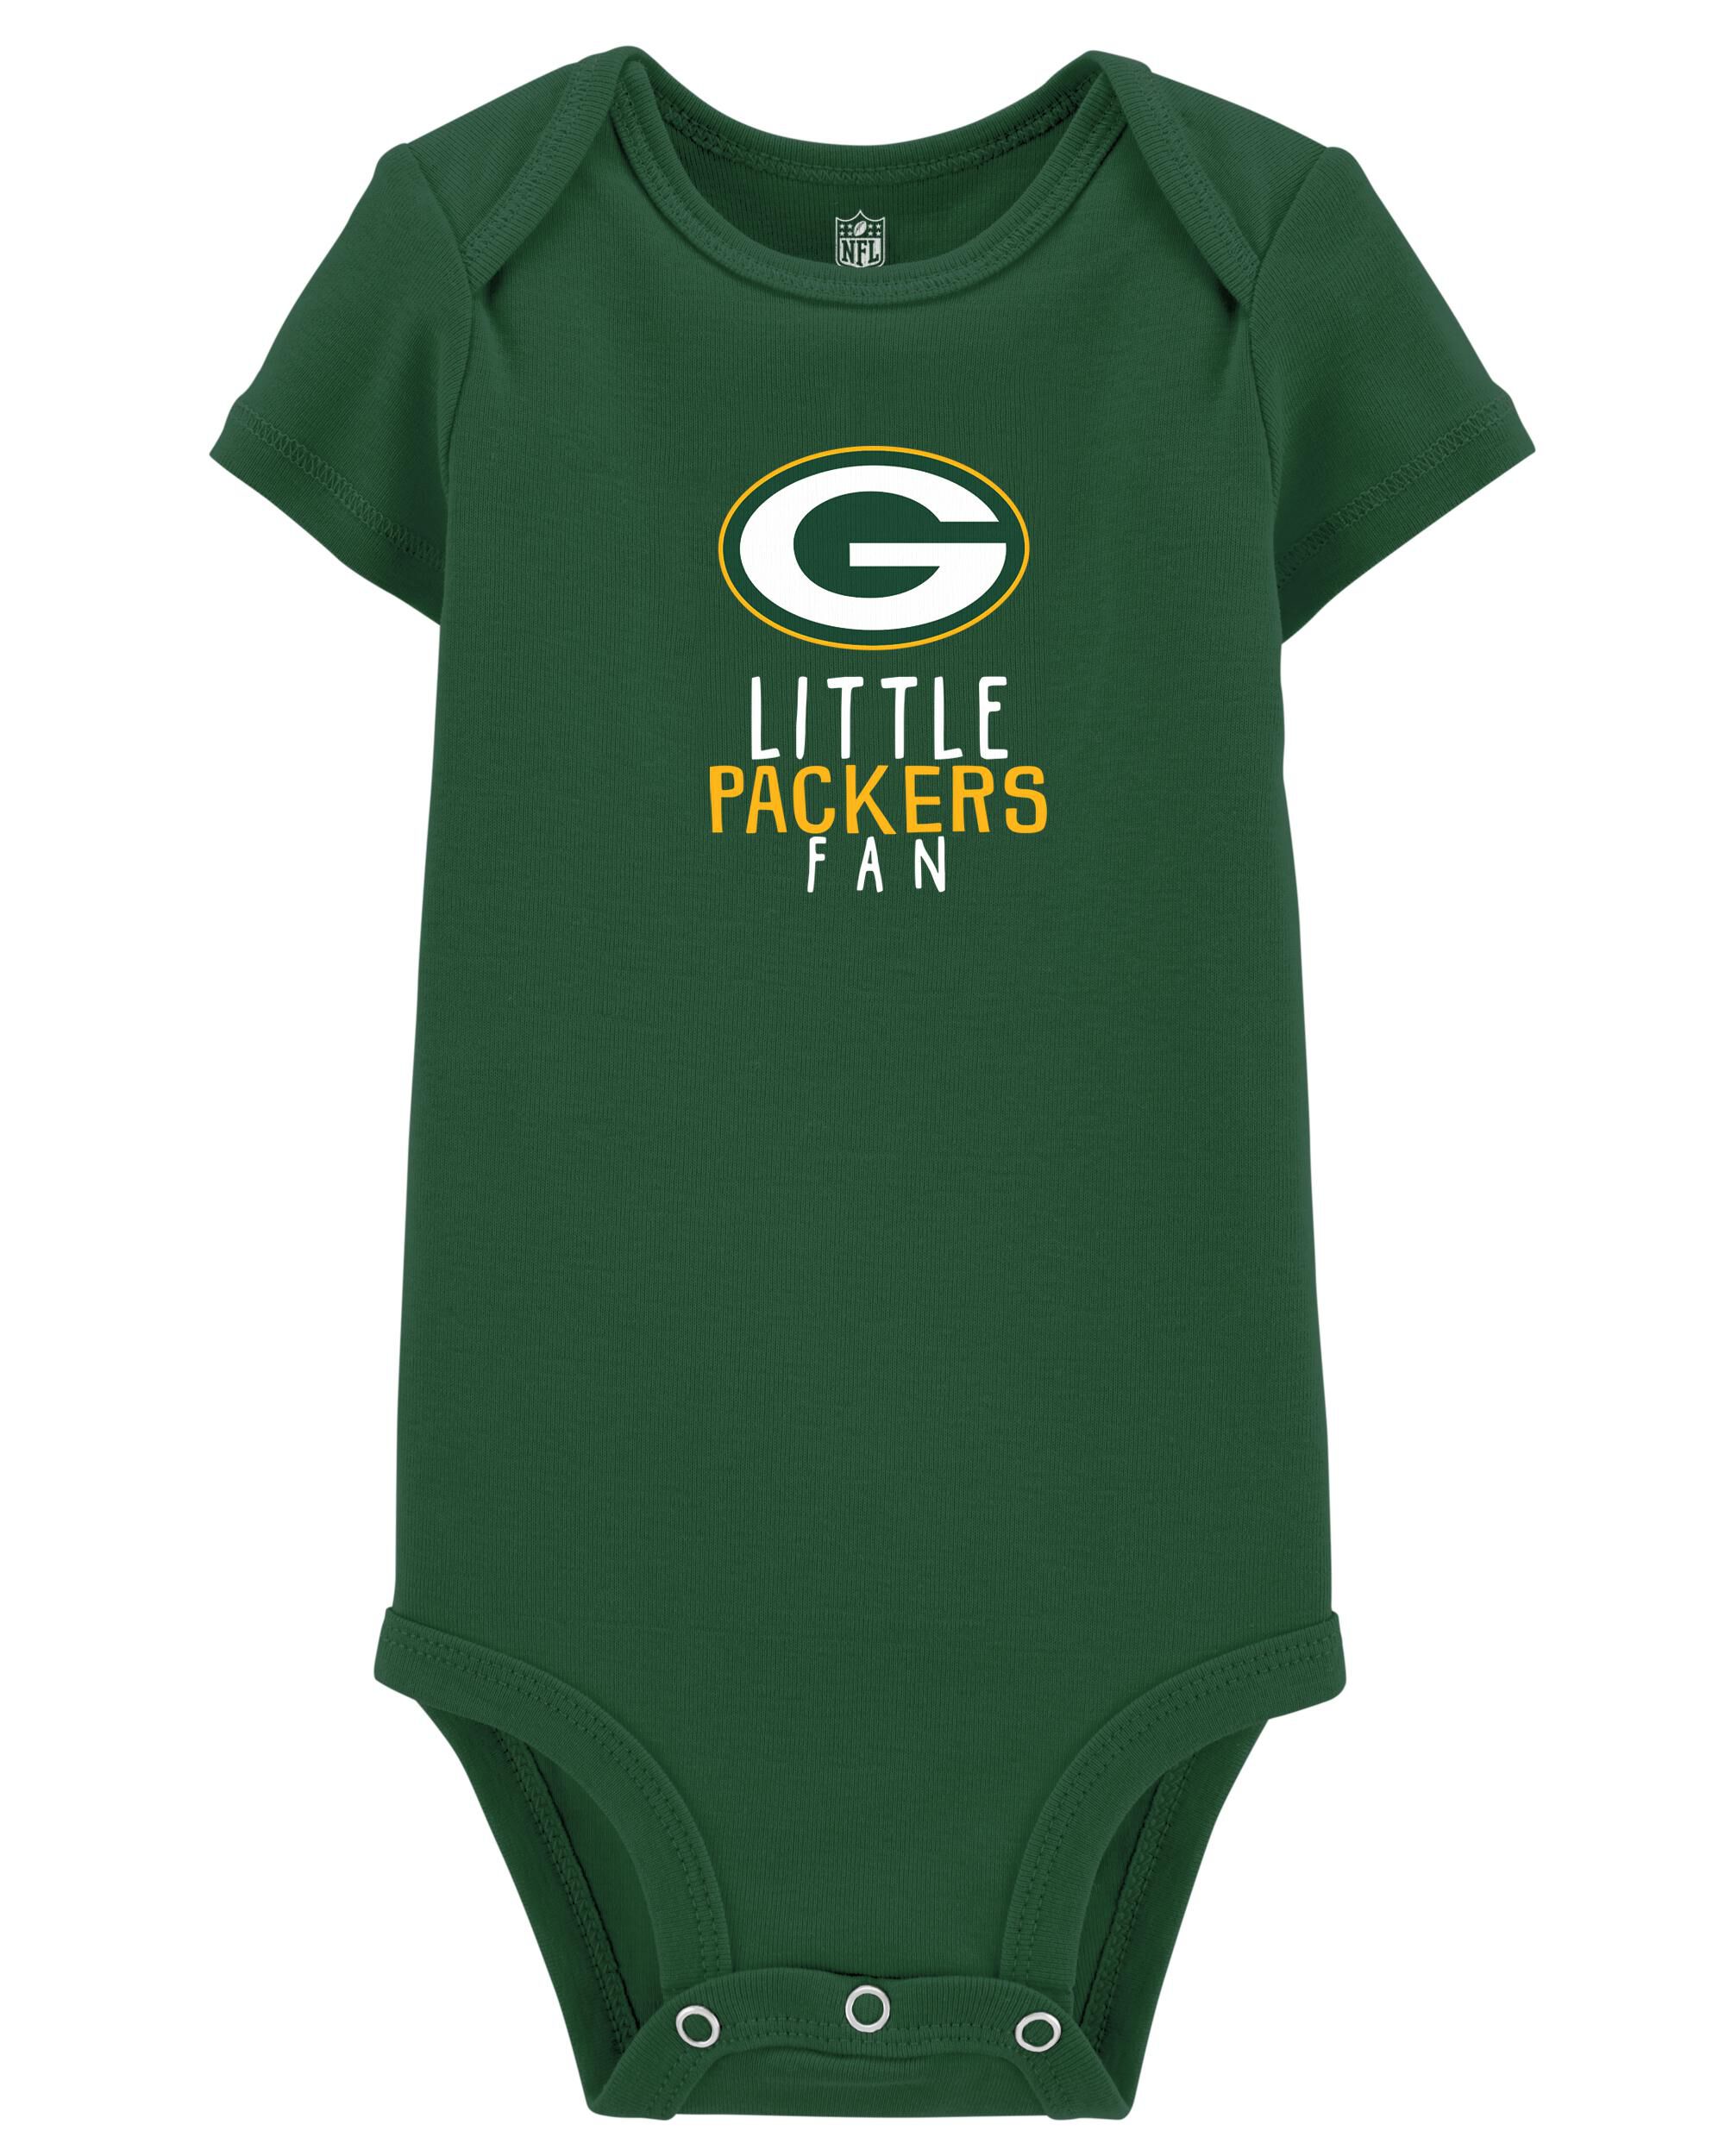 green bay packers baby gear